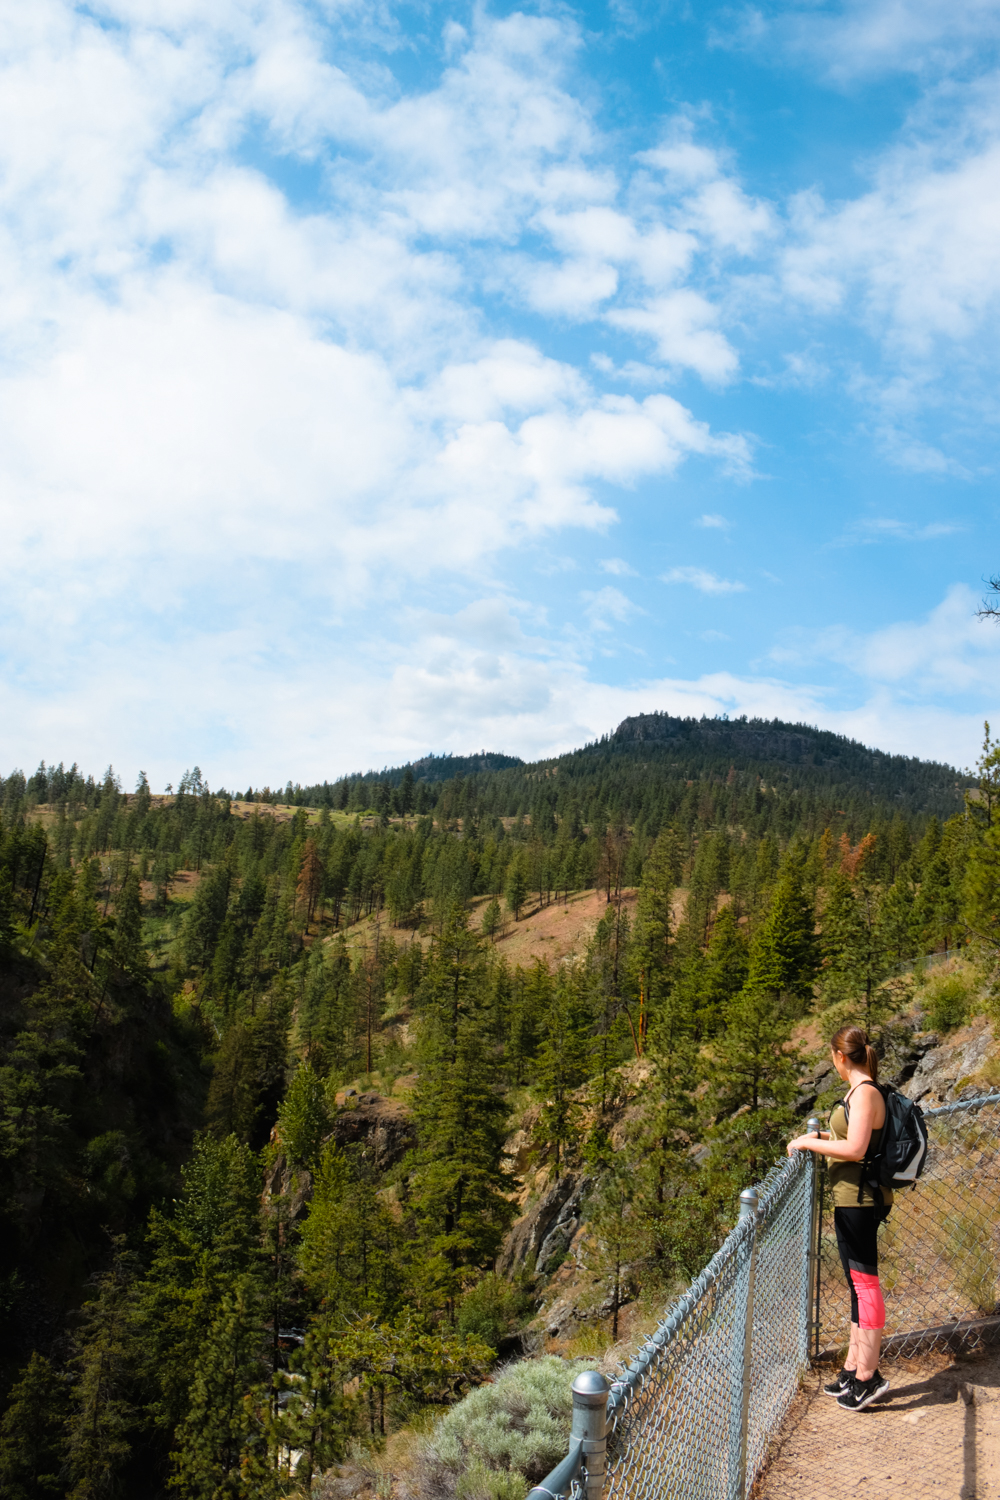 Woman stands next to chain link beside a canyon full of trees